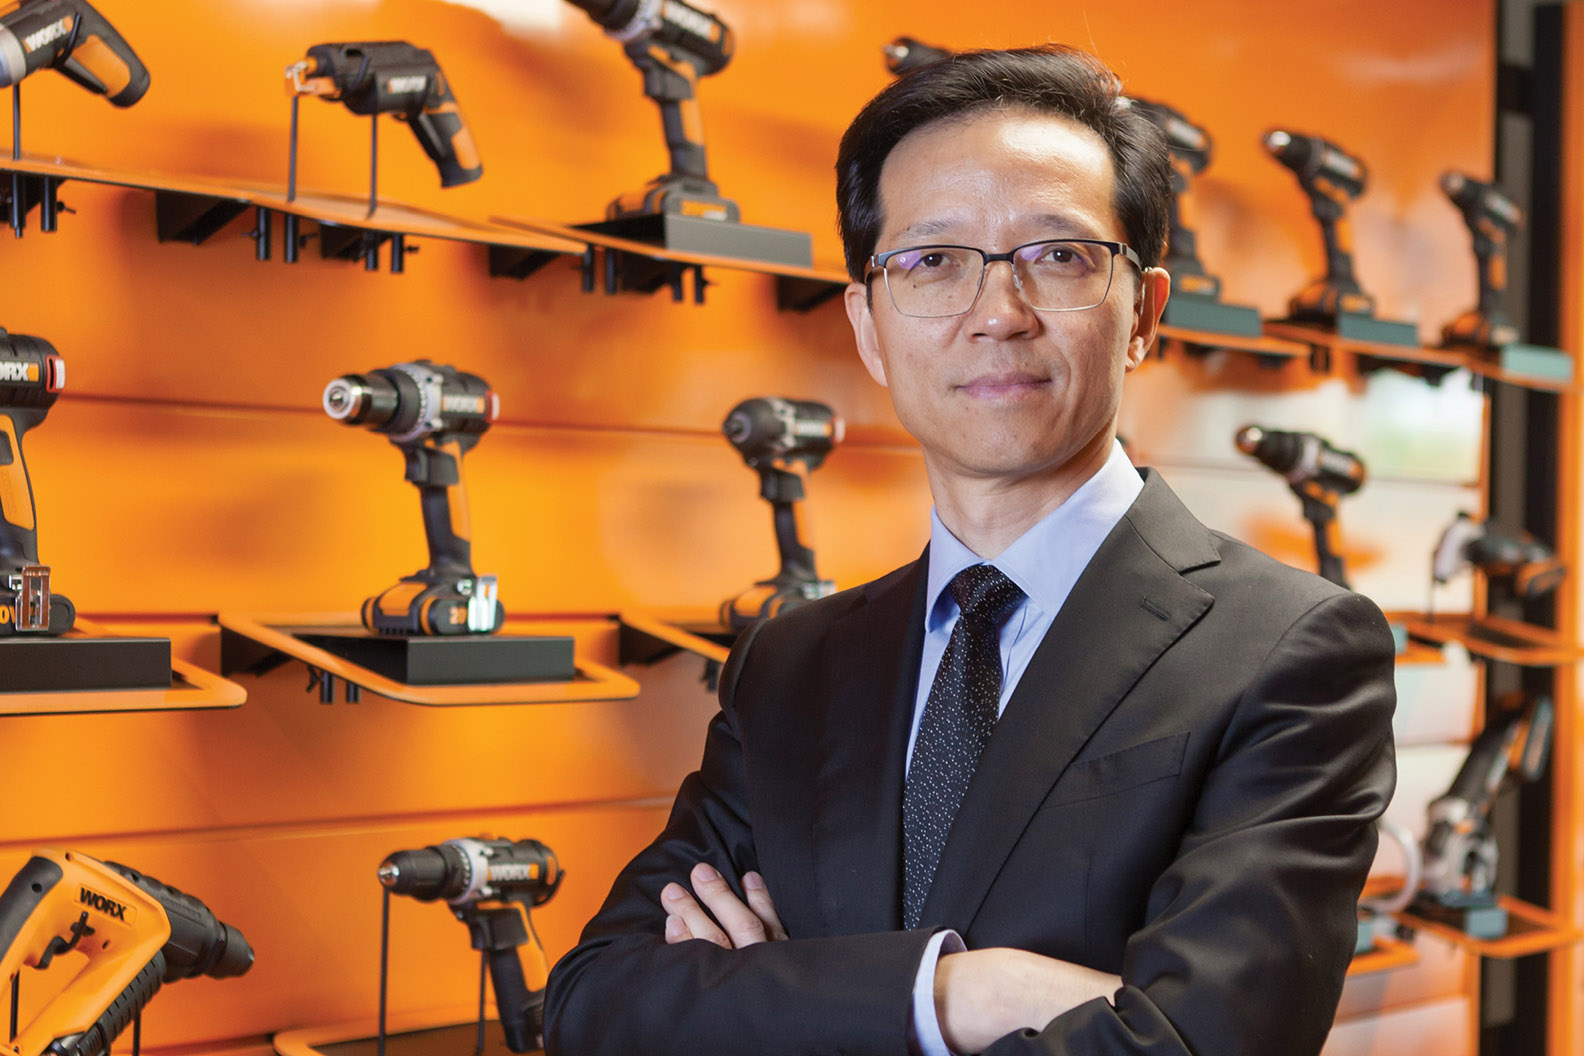 Don Gao, CEO of Positec Tool Corporation